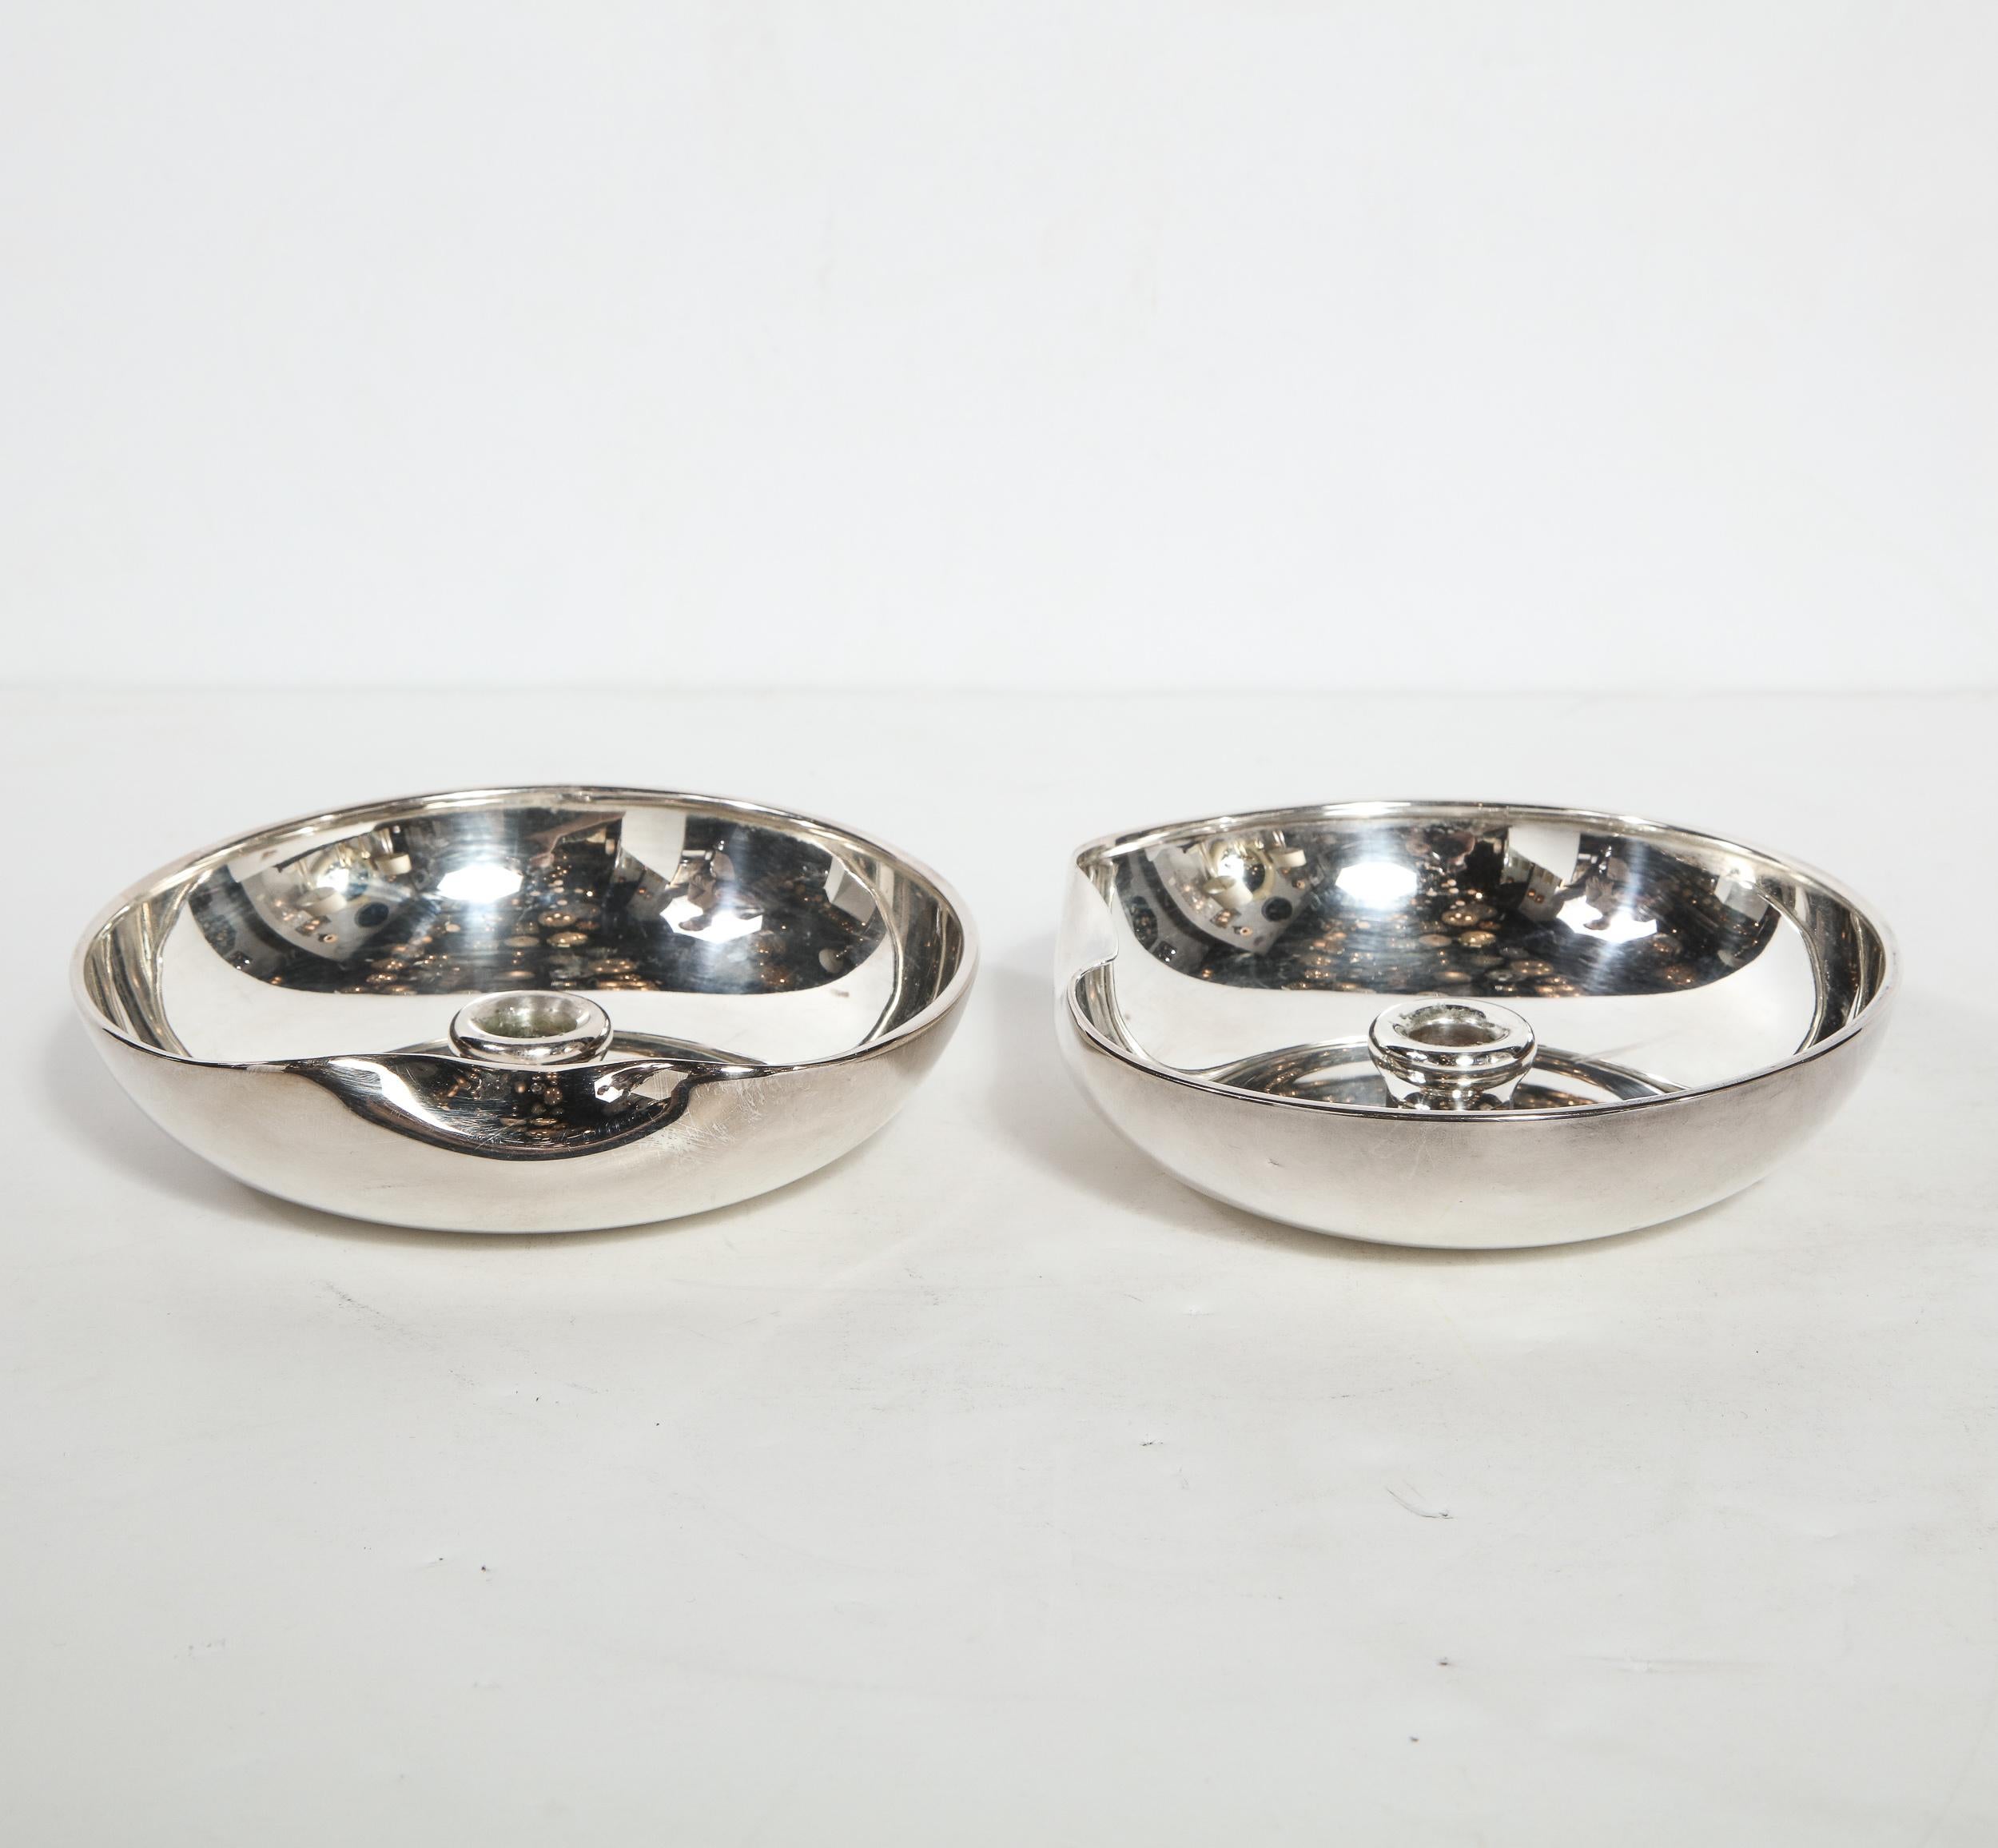 American Pair of Modernist Sterling Candle Holders by Elsa Peretti for Tiffany & Co. For Sale